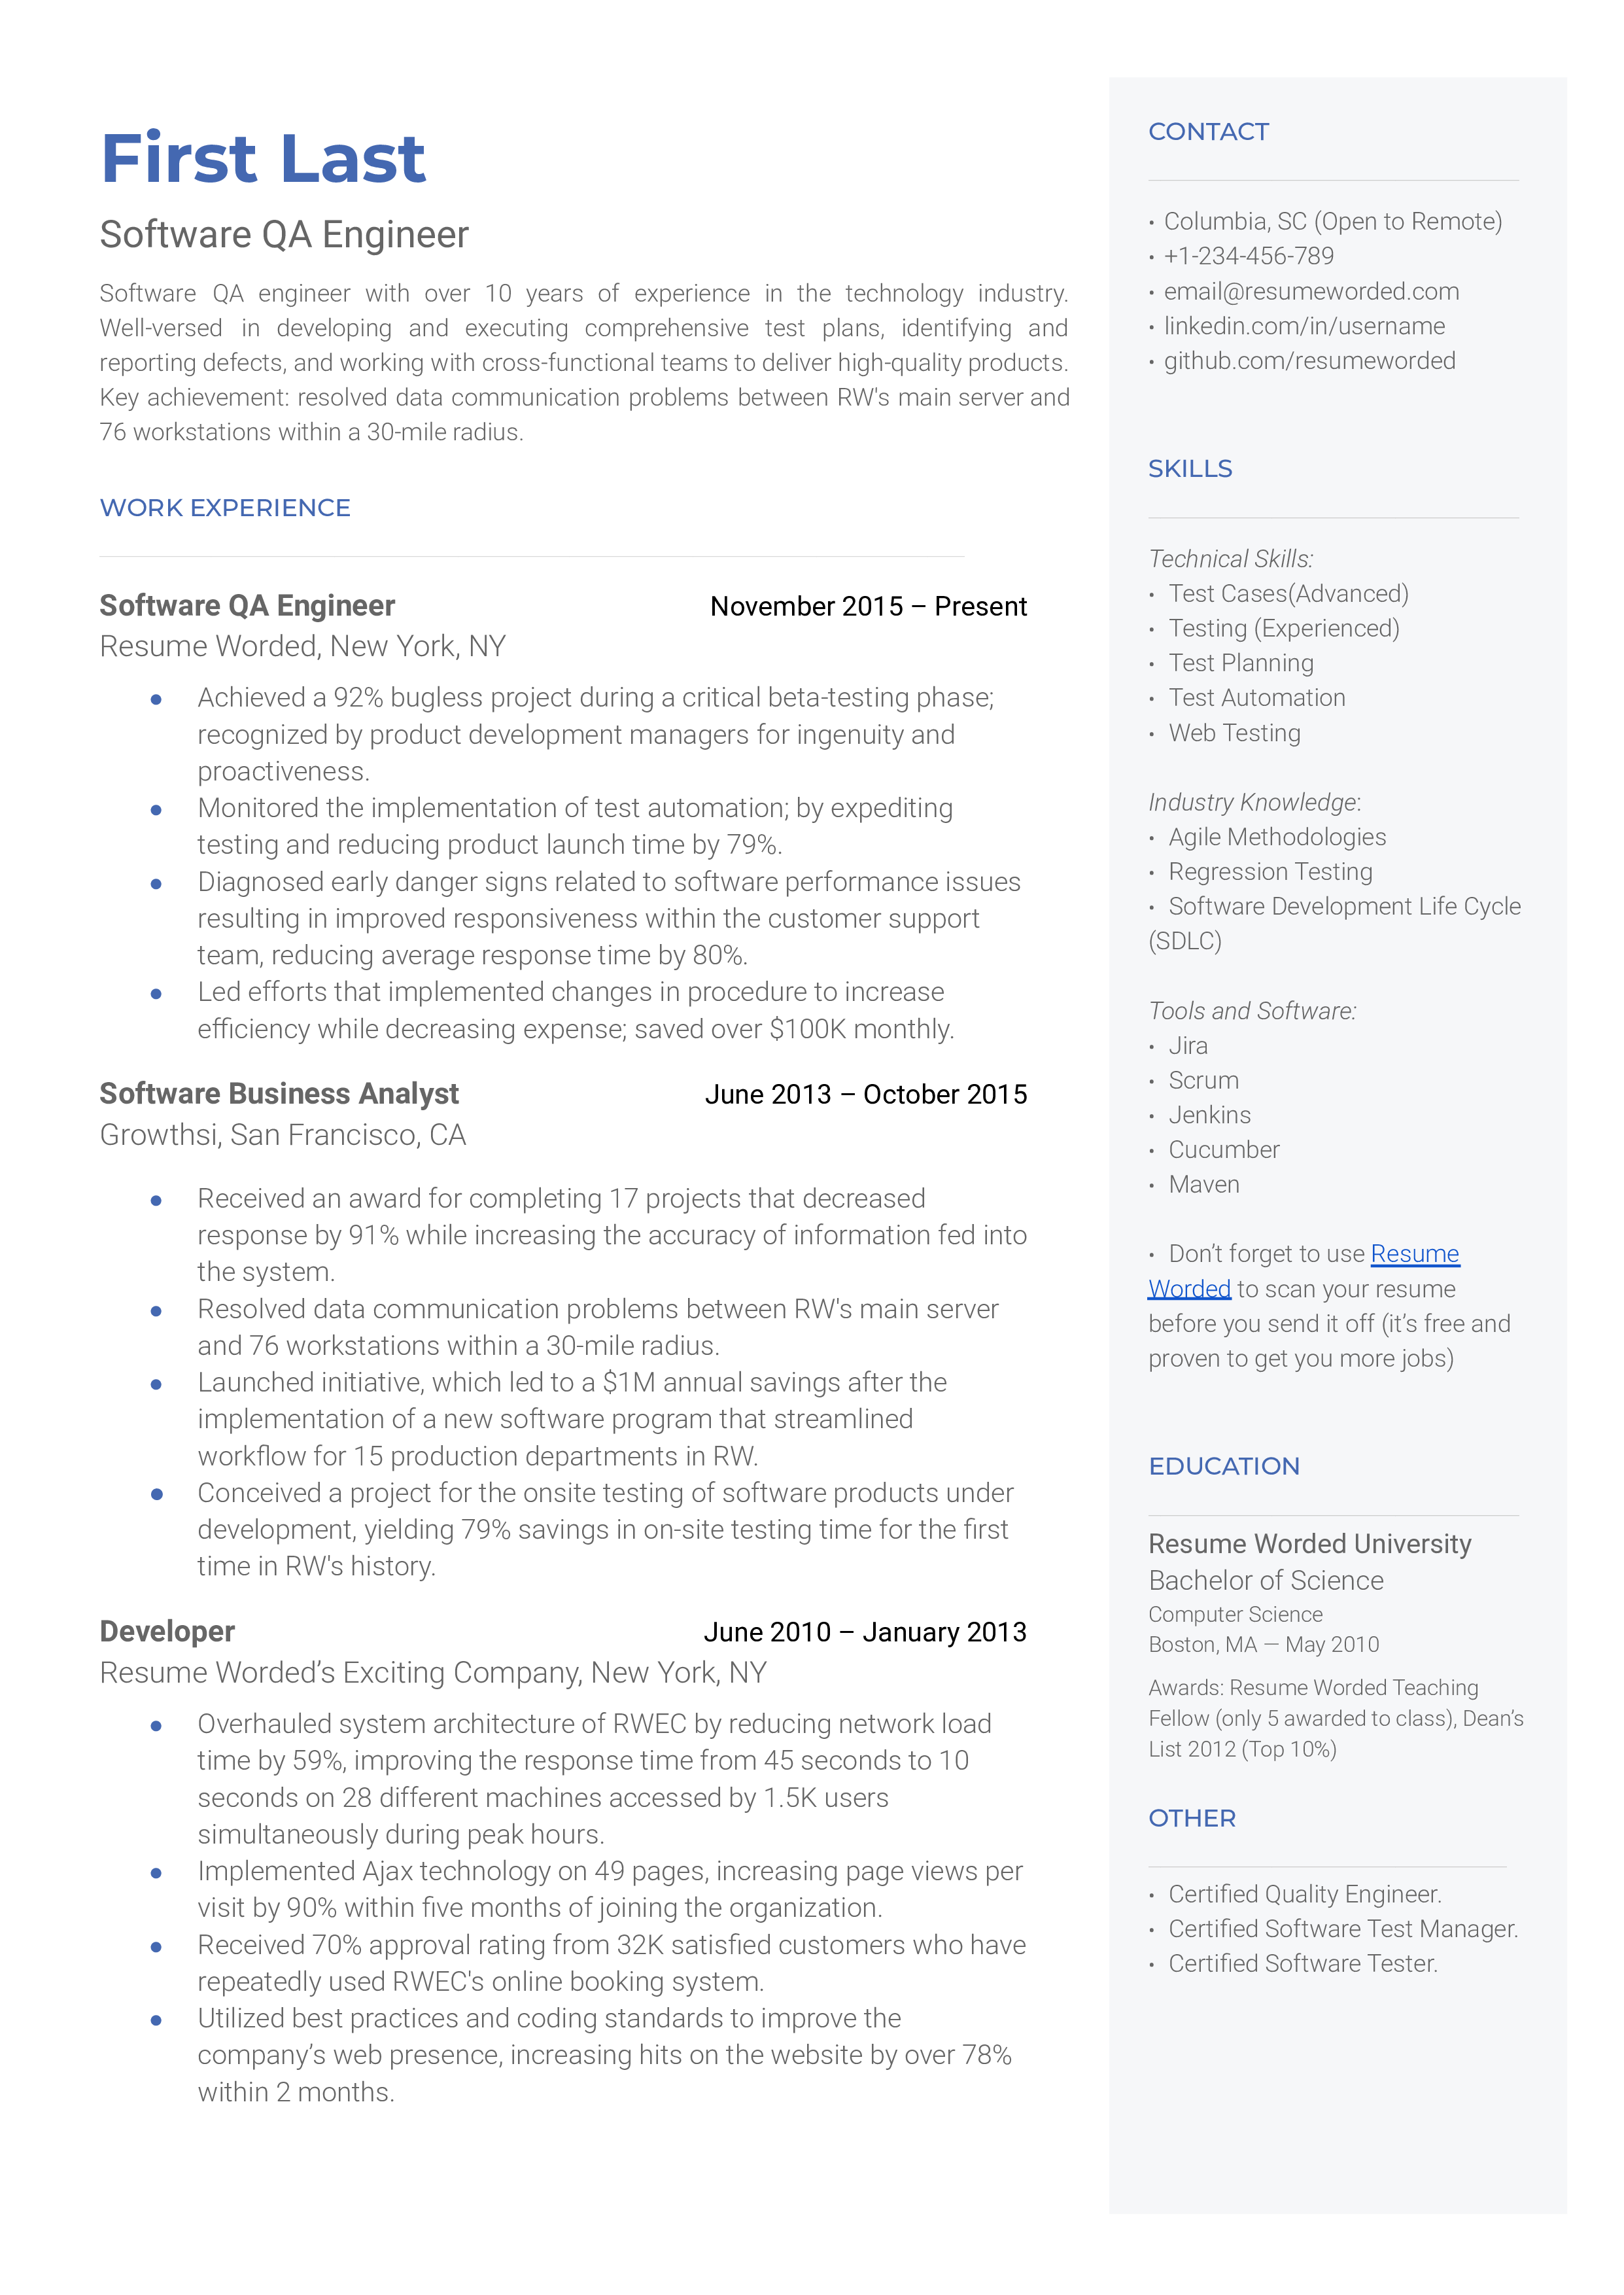 A software QA engineer resume sample that highlights the applicant’s value addition and awards.